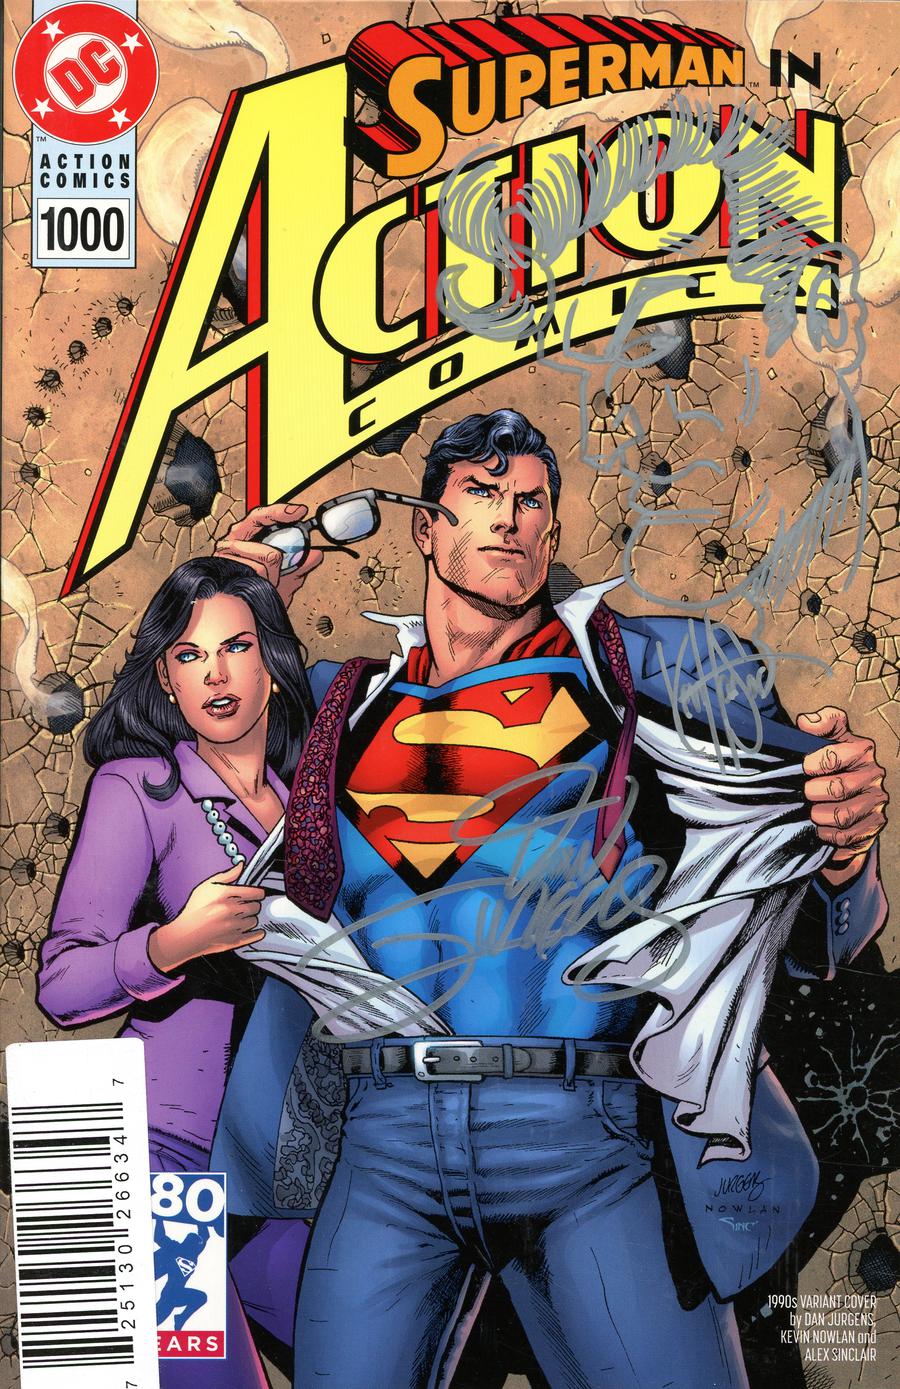 Action Comics Vol 2 #1000 Cover Q DF Signed By Dan Jurgens & Remarked By Ken Haeser